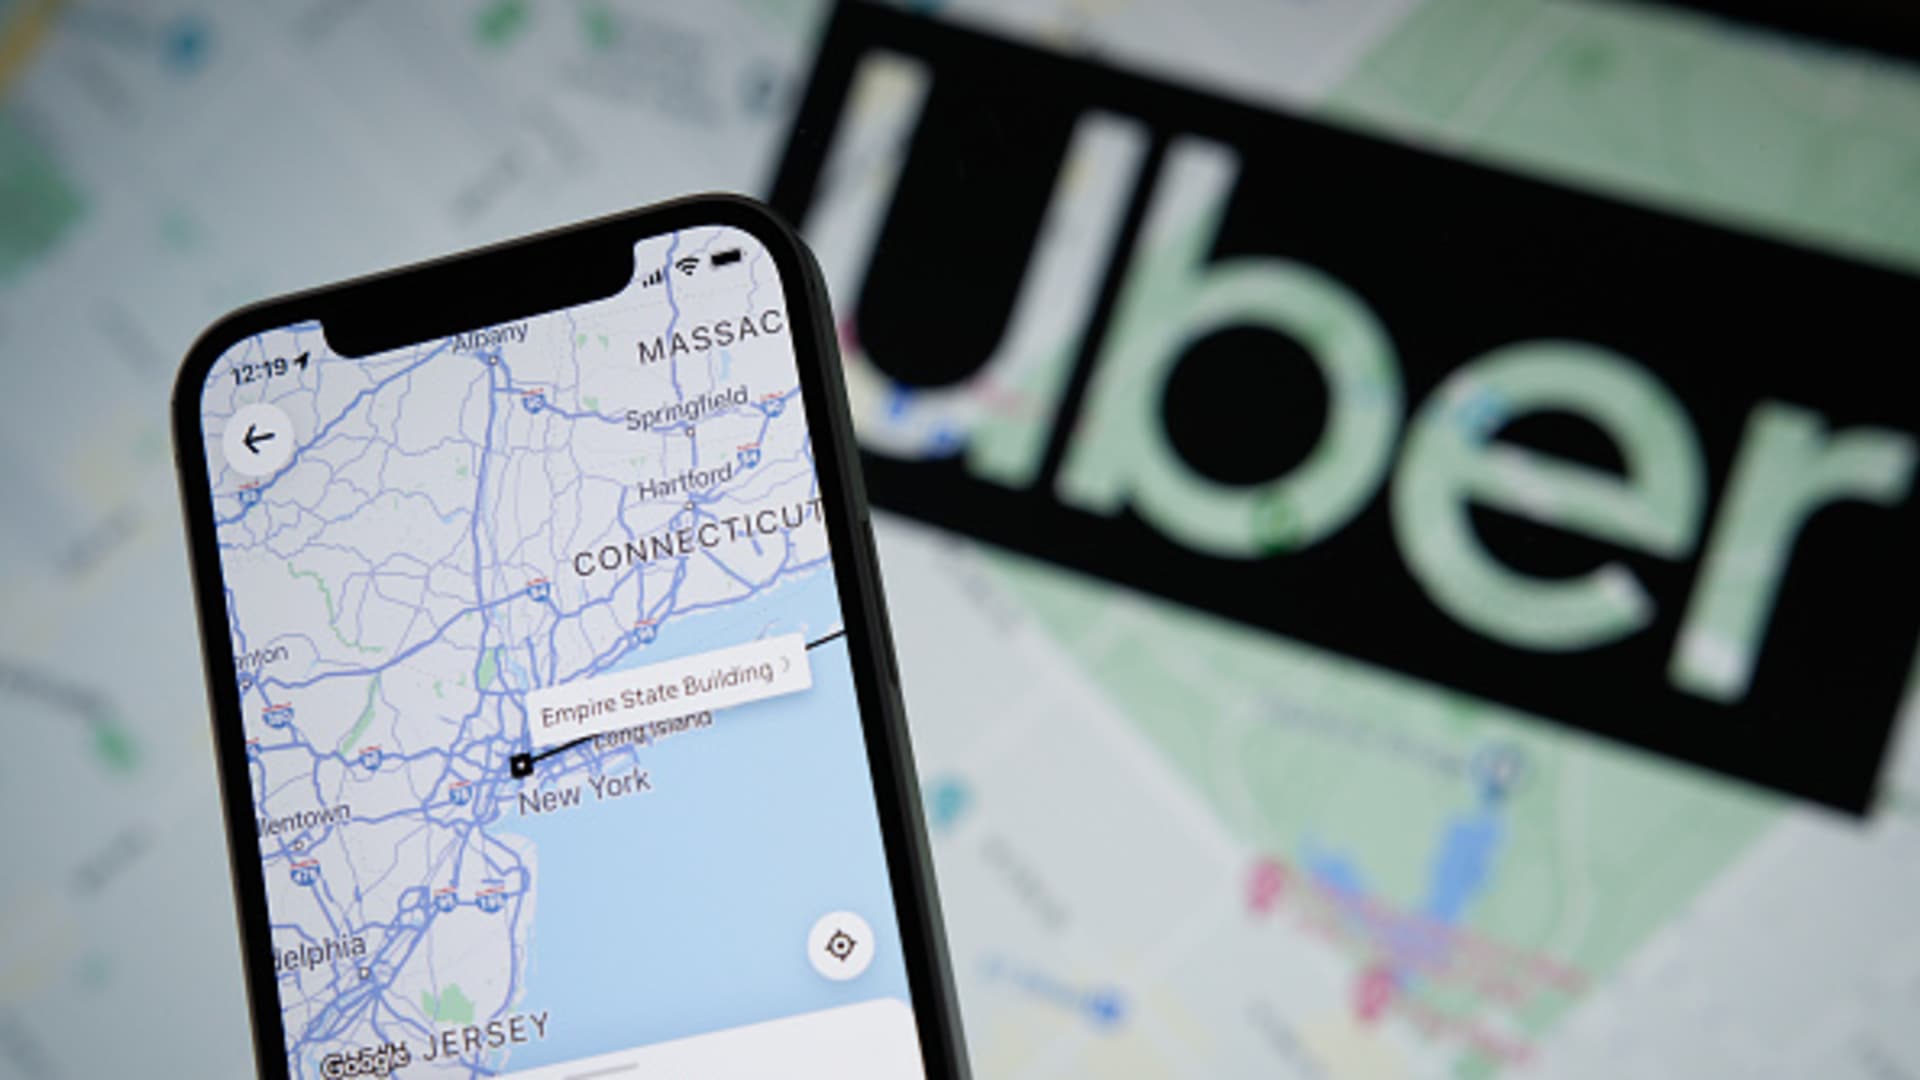 battle economy Uber, ends over the gig drivers Lyft How